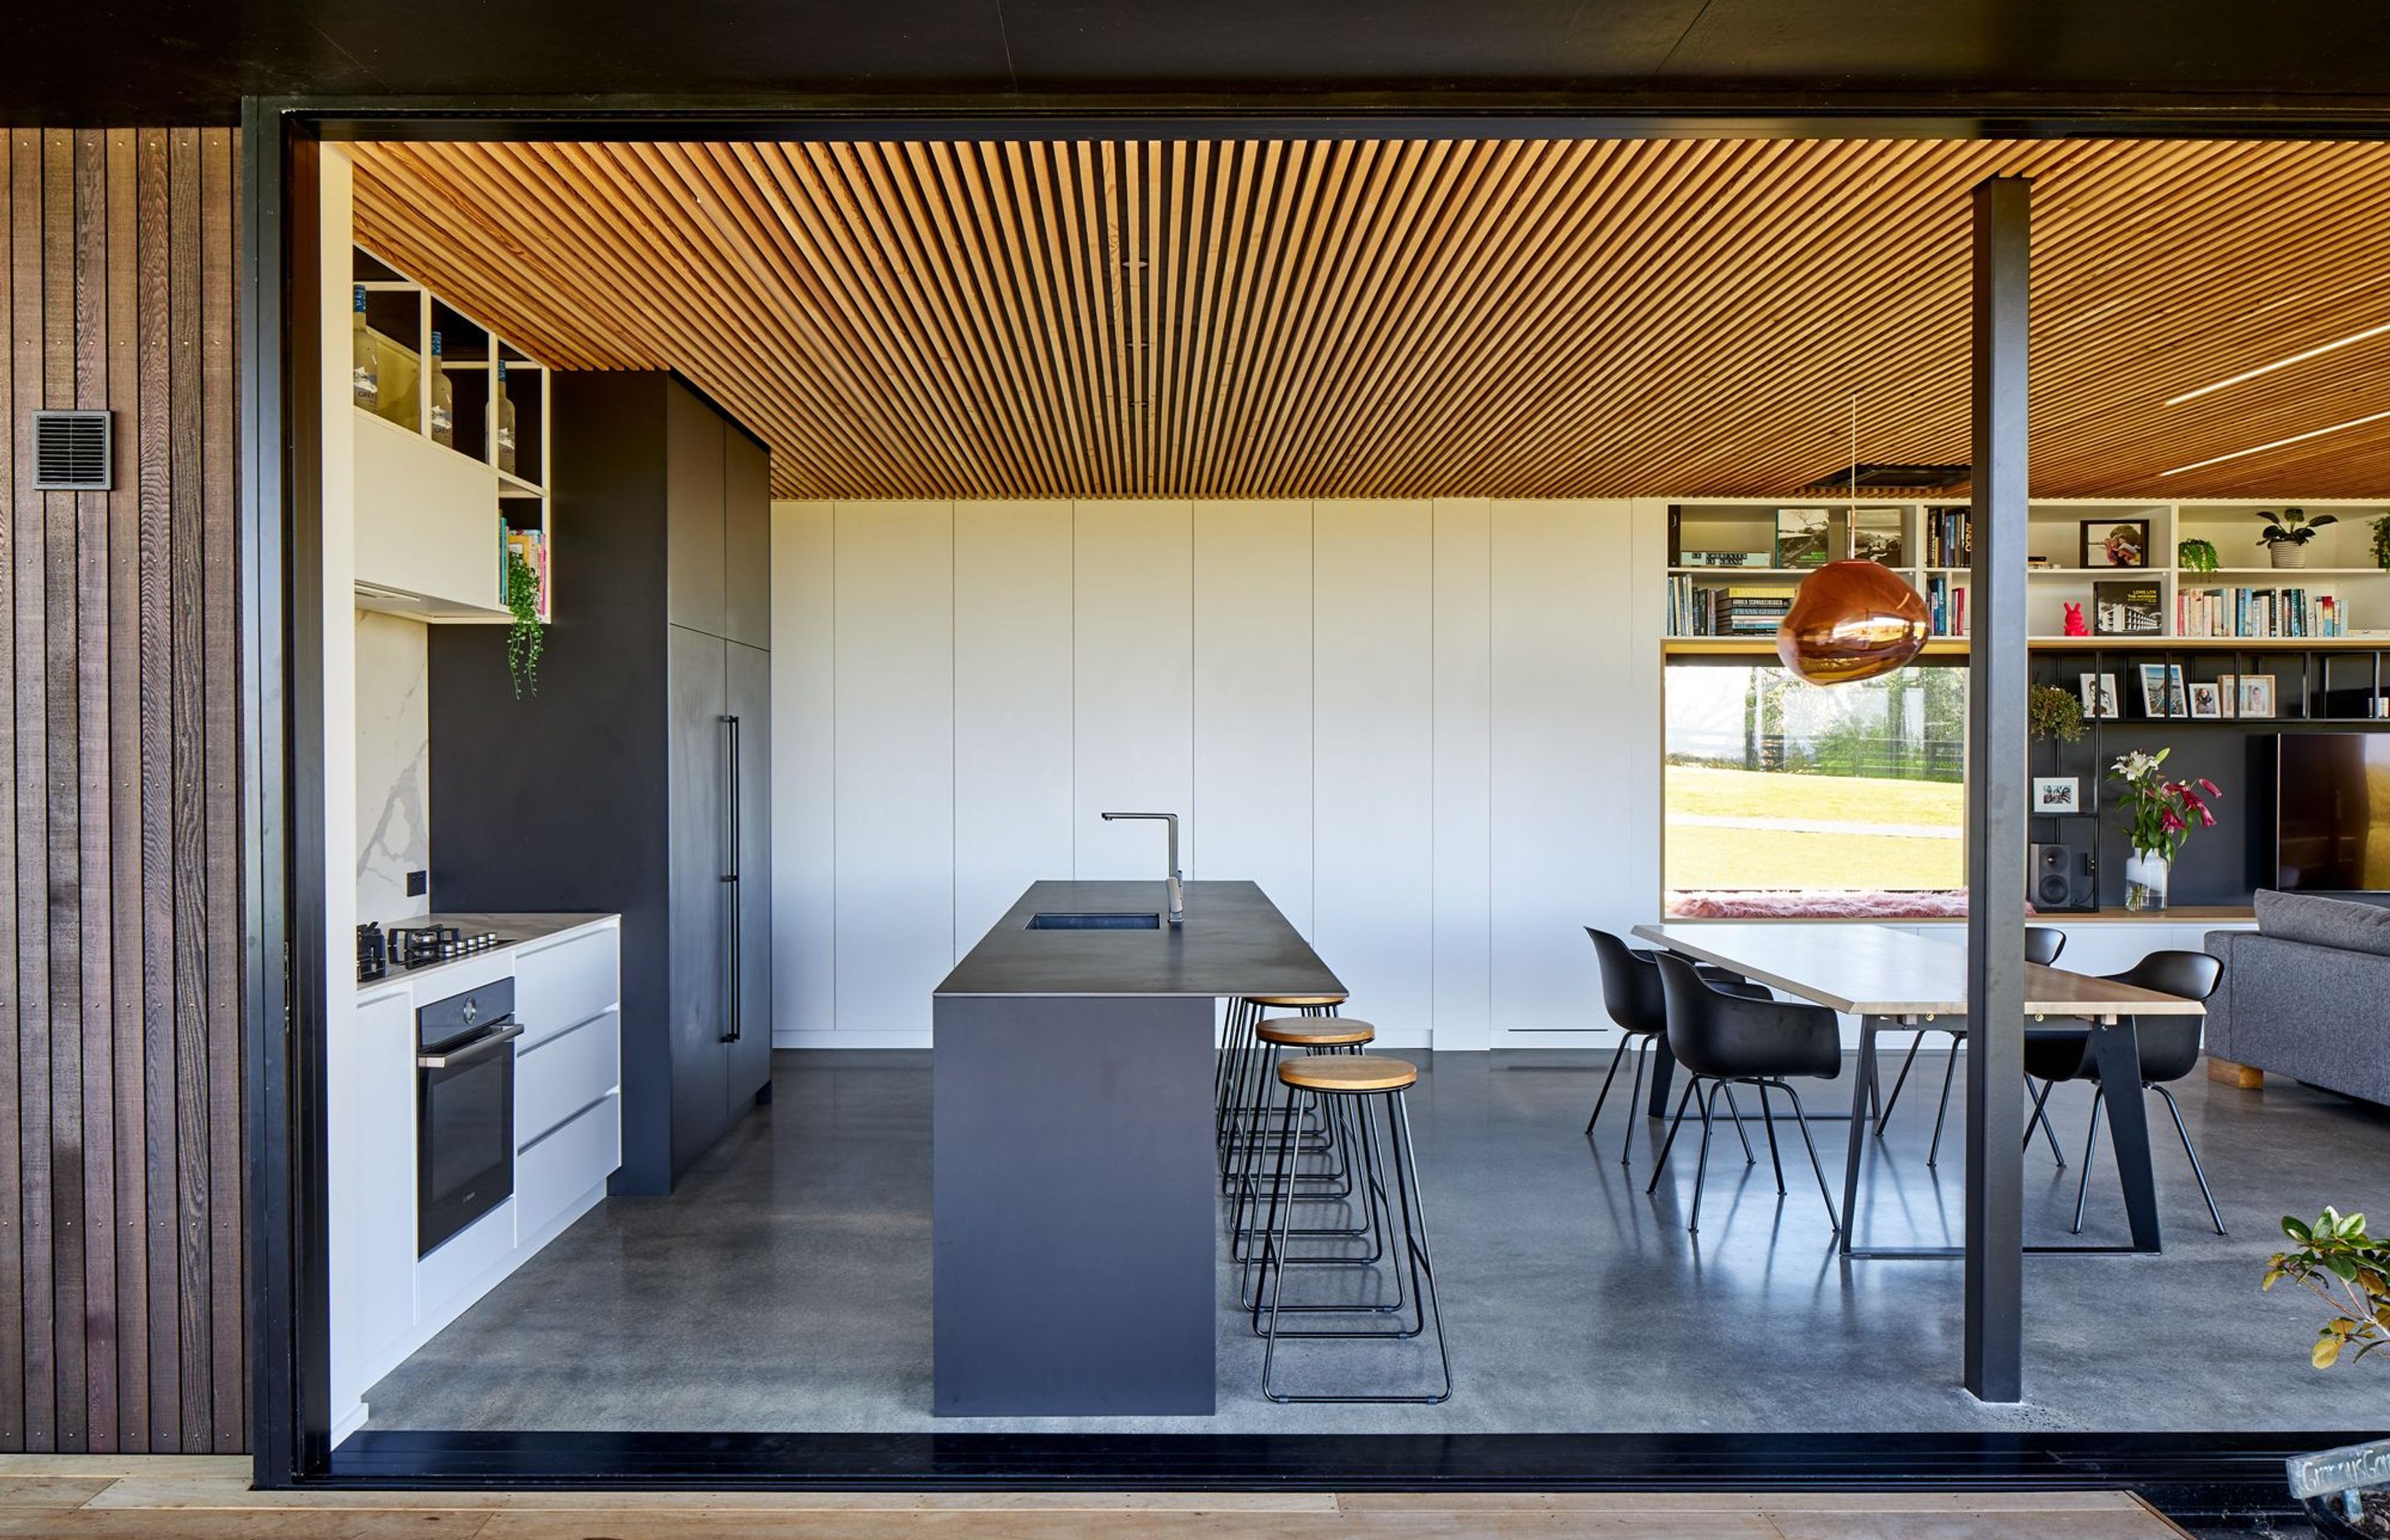 Full-height, full-width sliding doors ensure the whole house can be opened up, providing ample natural ventilation and blurring the lines between indoor living and outdoor living.